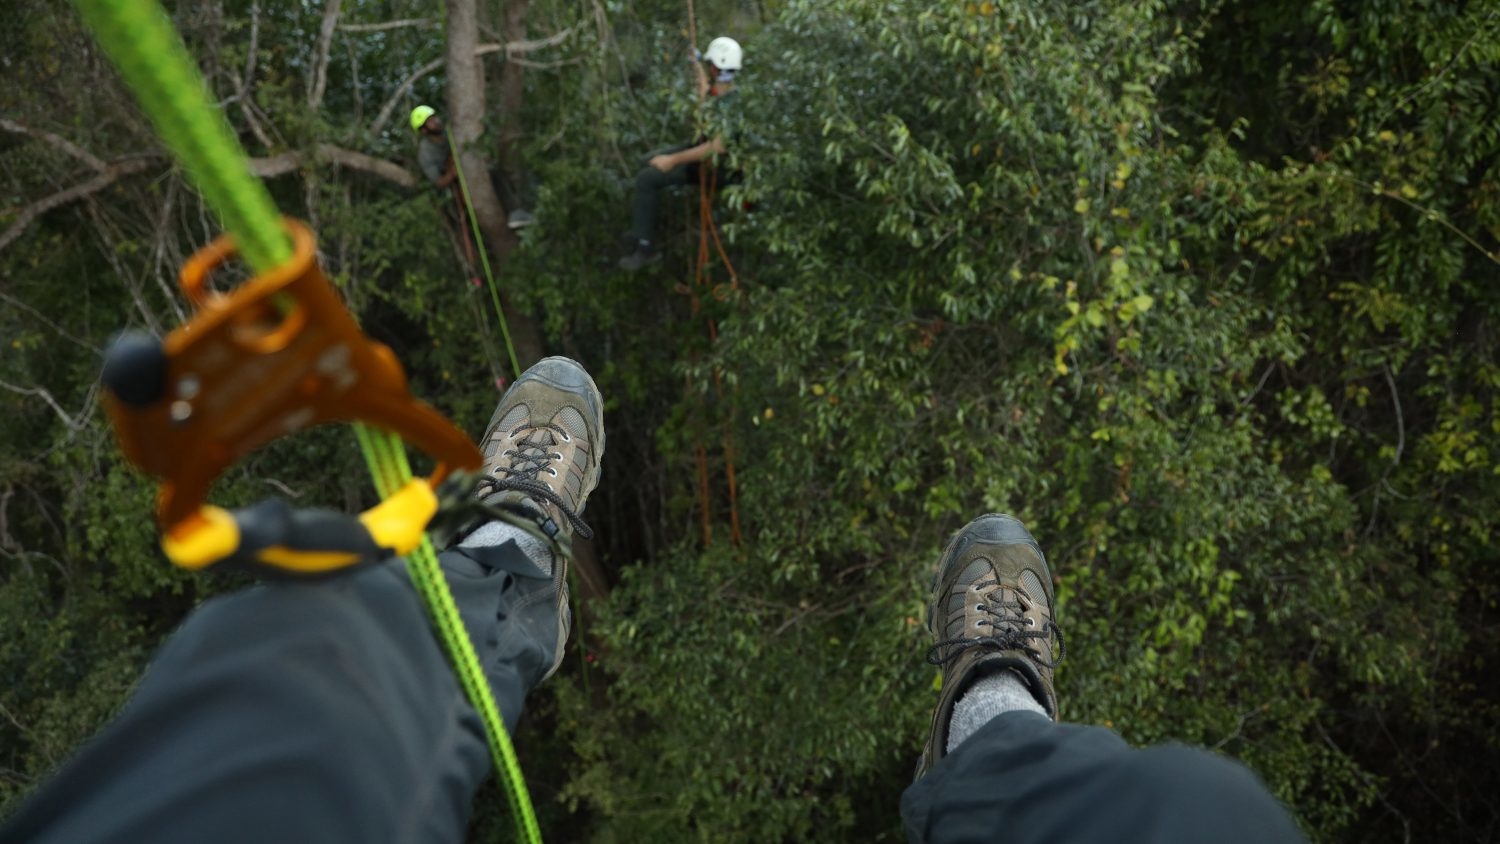 A photographer's view from the top of a tree canopy